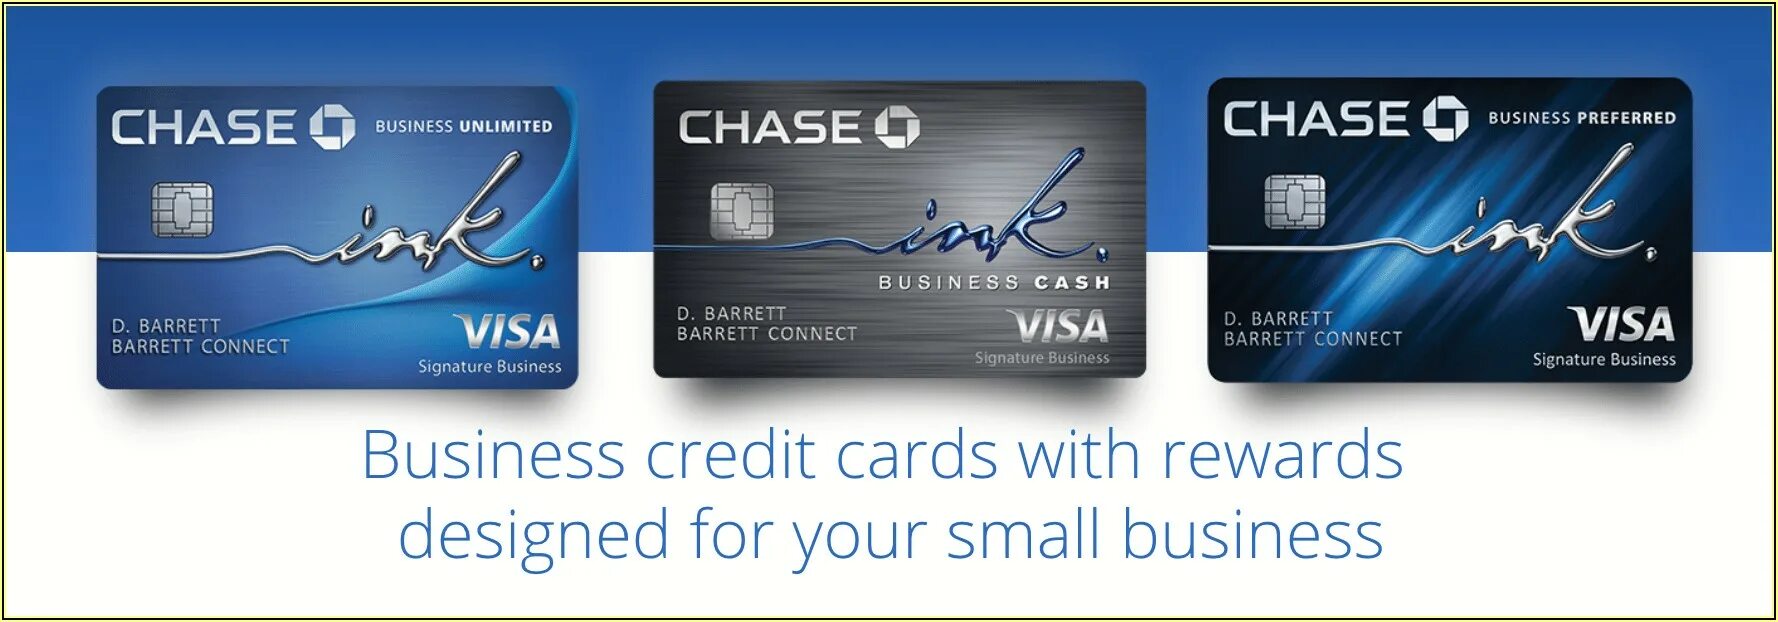 Chase Business. Банковская карта бизнес preffered. Unlimited Card. Chevy Chase credit Cards. Бизнес кредит карта